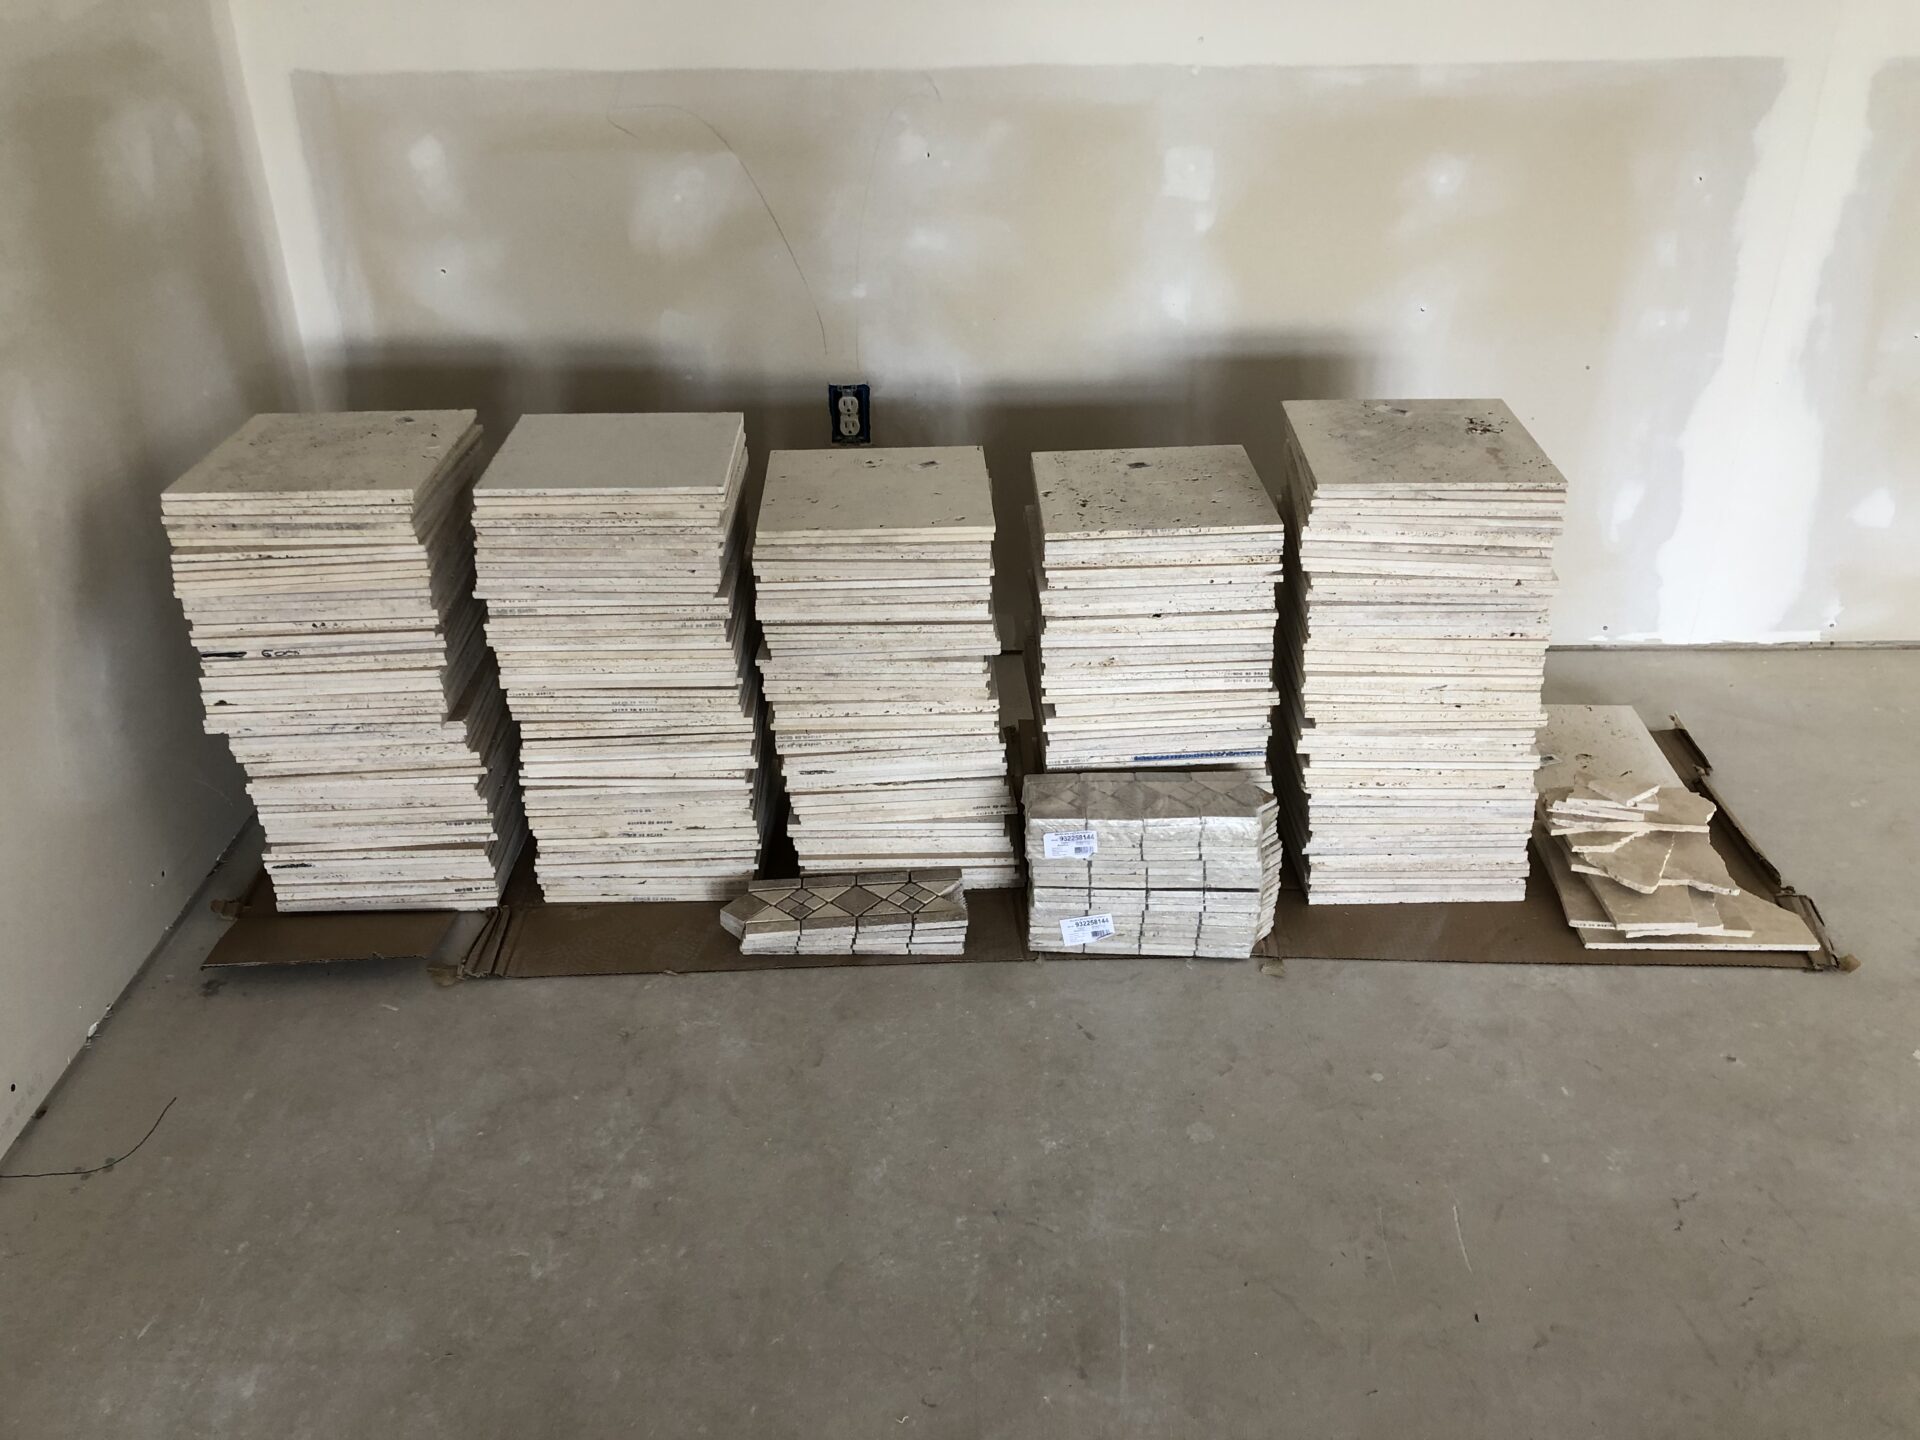 Large stack of tile for the bathroom